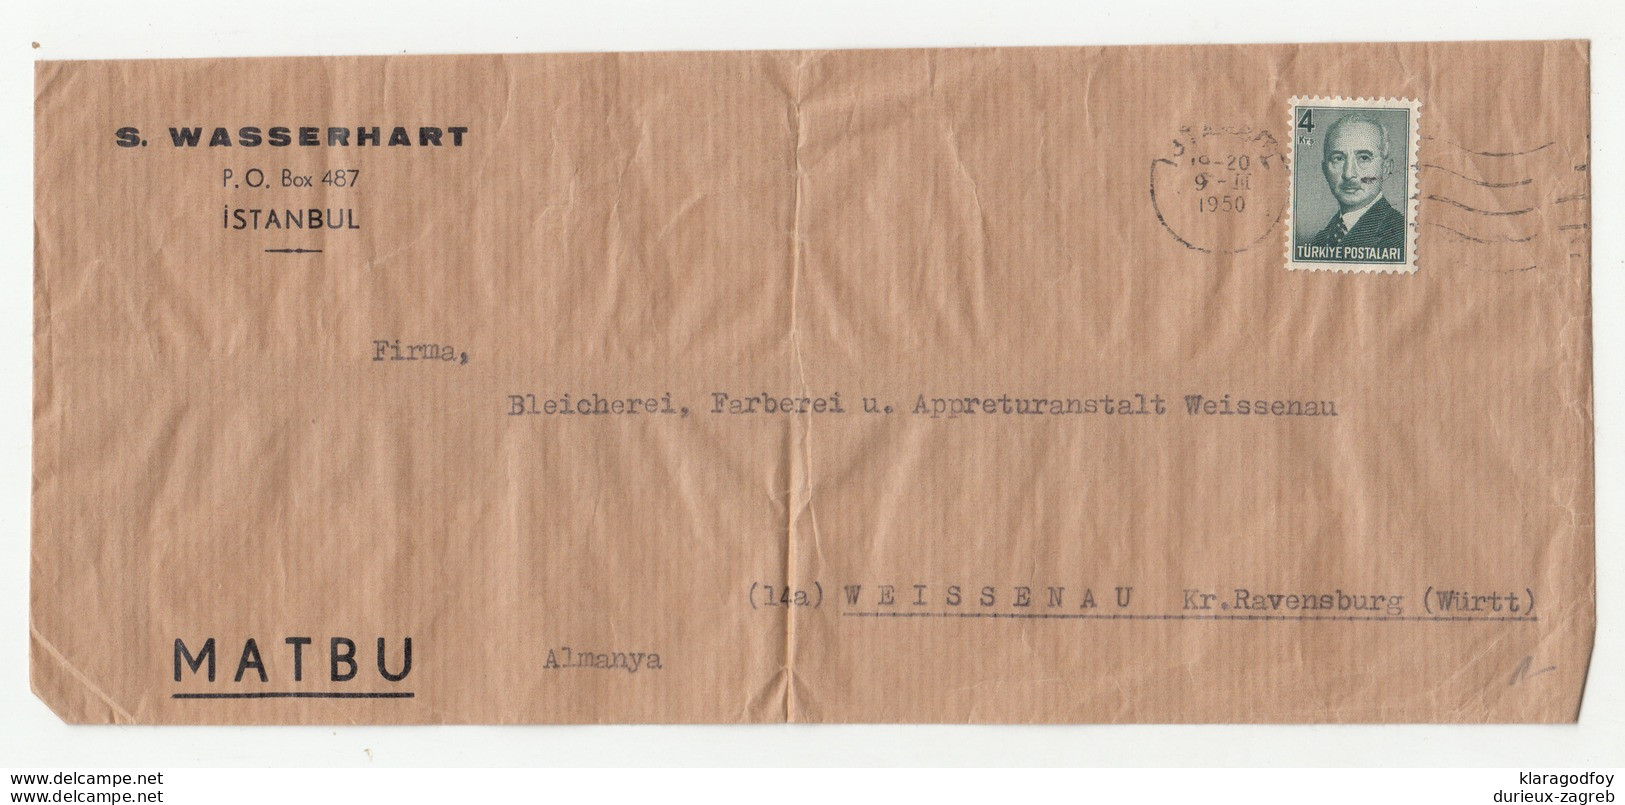 S. Wasserhart Company Letter Cover Posted 1950 To Germany B200110 - Covers & Documents